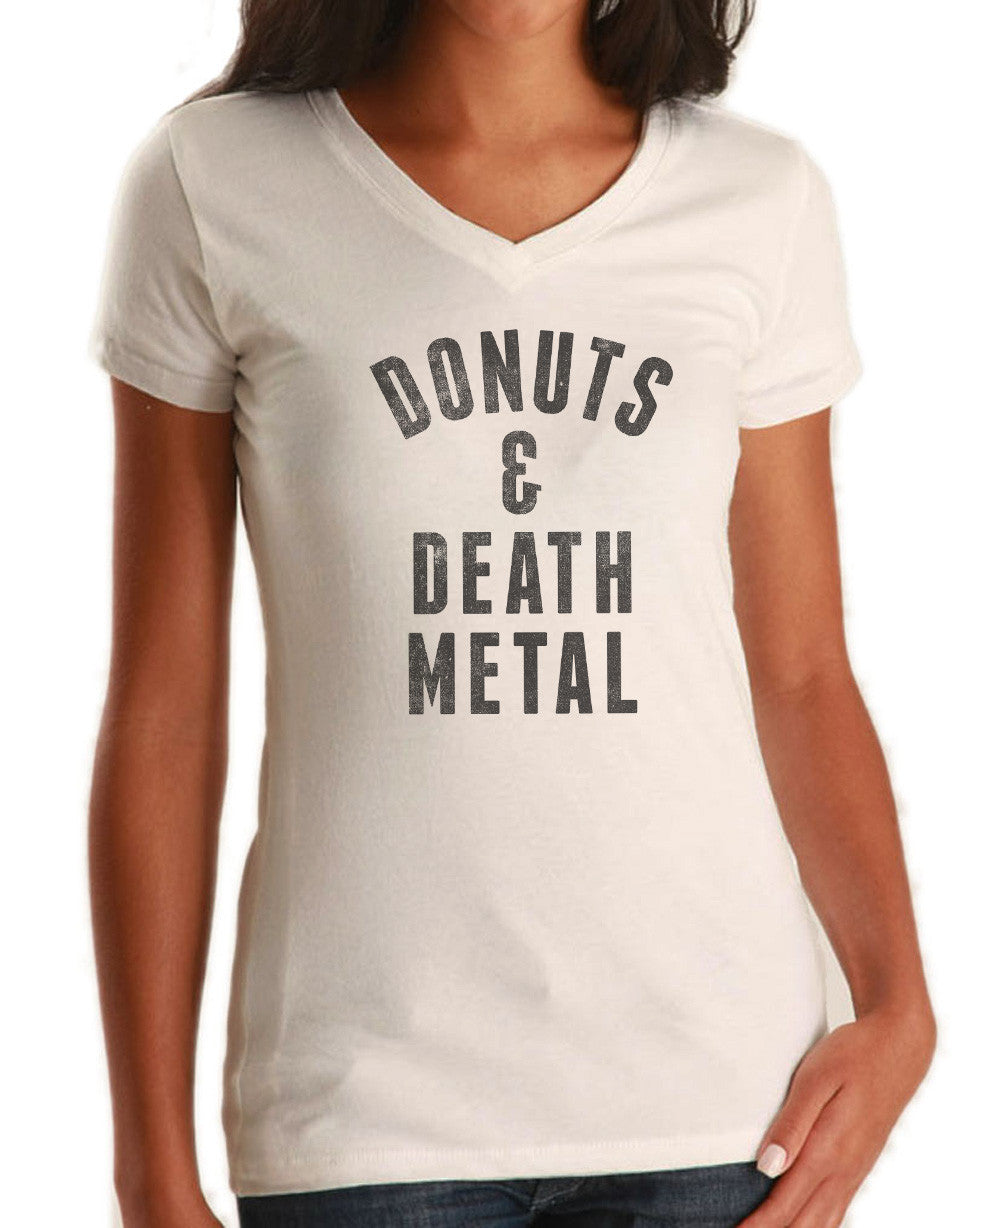 Women's Donuts and Death Metal Vneck T-Shirt